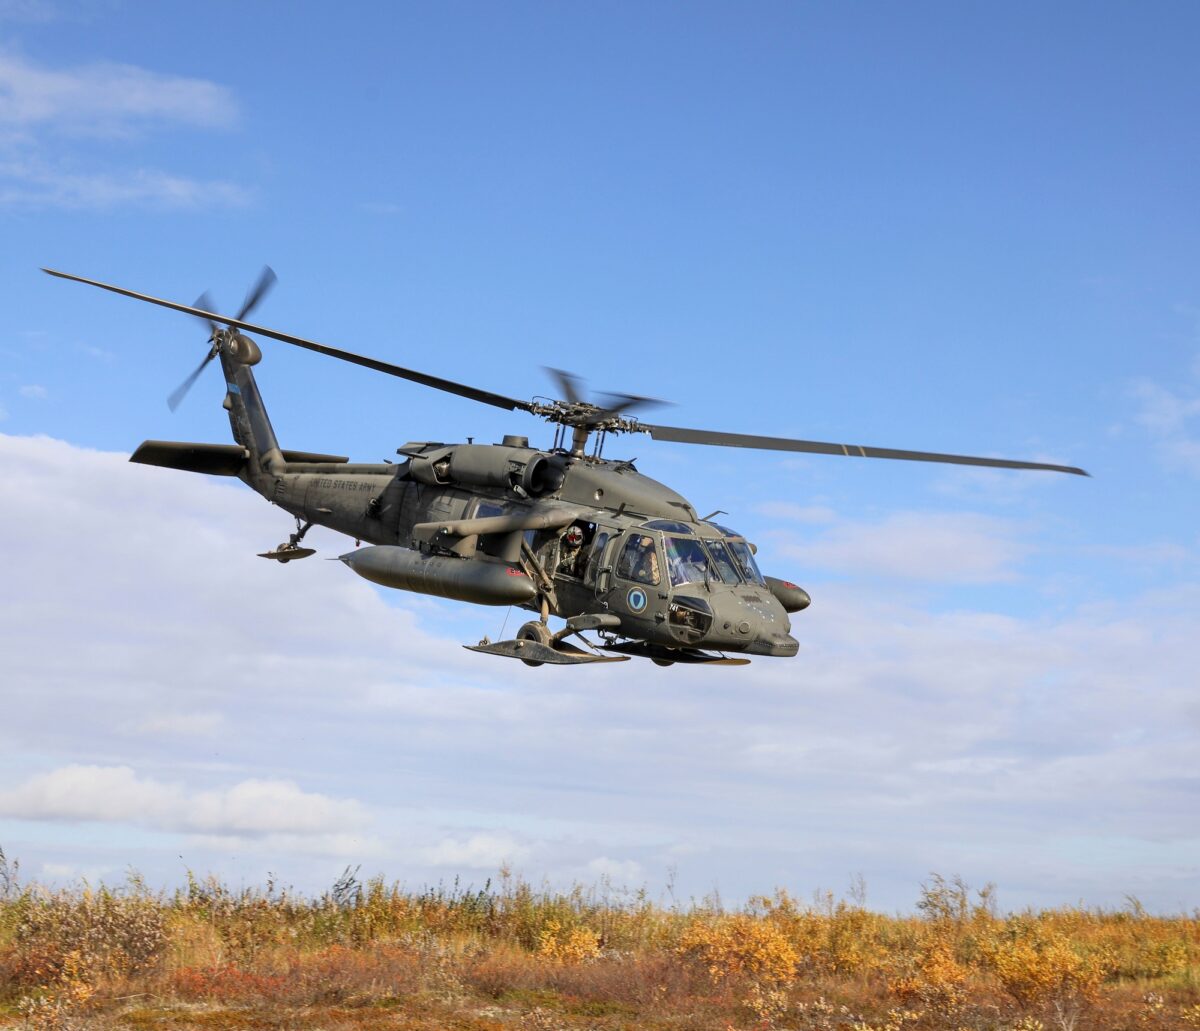 An Alaska Army National Guard UH-60 helicopter assists after Typhoon Merbok.